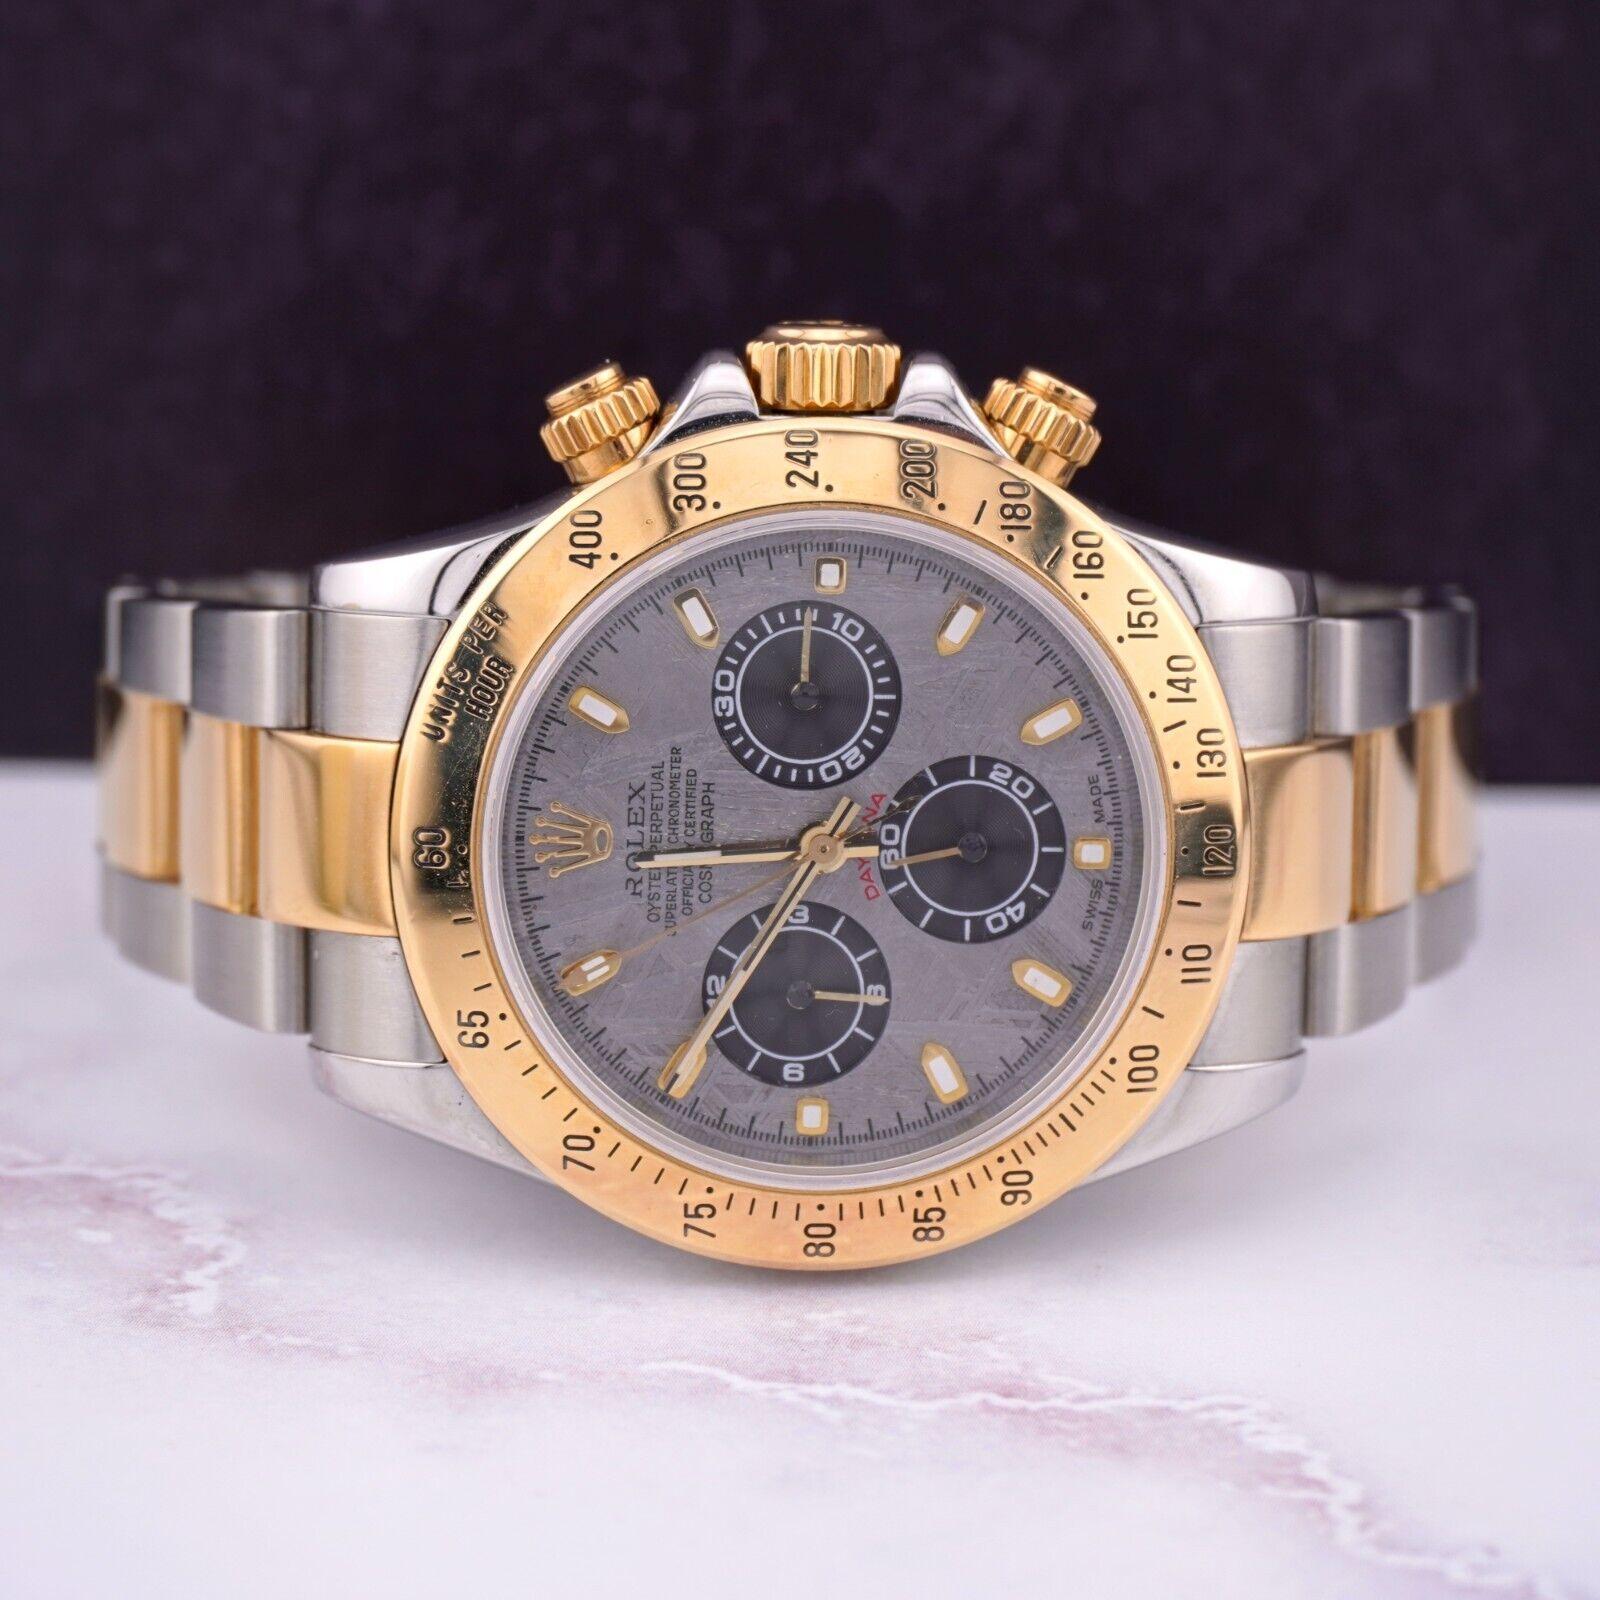 Rolex Daytona 40mm Watch. A Pre-owned watch w/ Gift Box. Watch is 100% Authentic and Comes with Authenticity Card. Watch Reference is 116523 and is in Excellent Condition (See Pictures). The dial color is Meteorite and material is 18k yellow gold